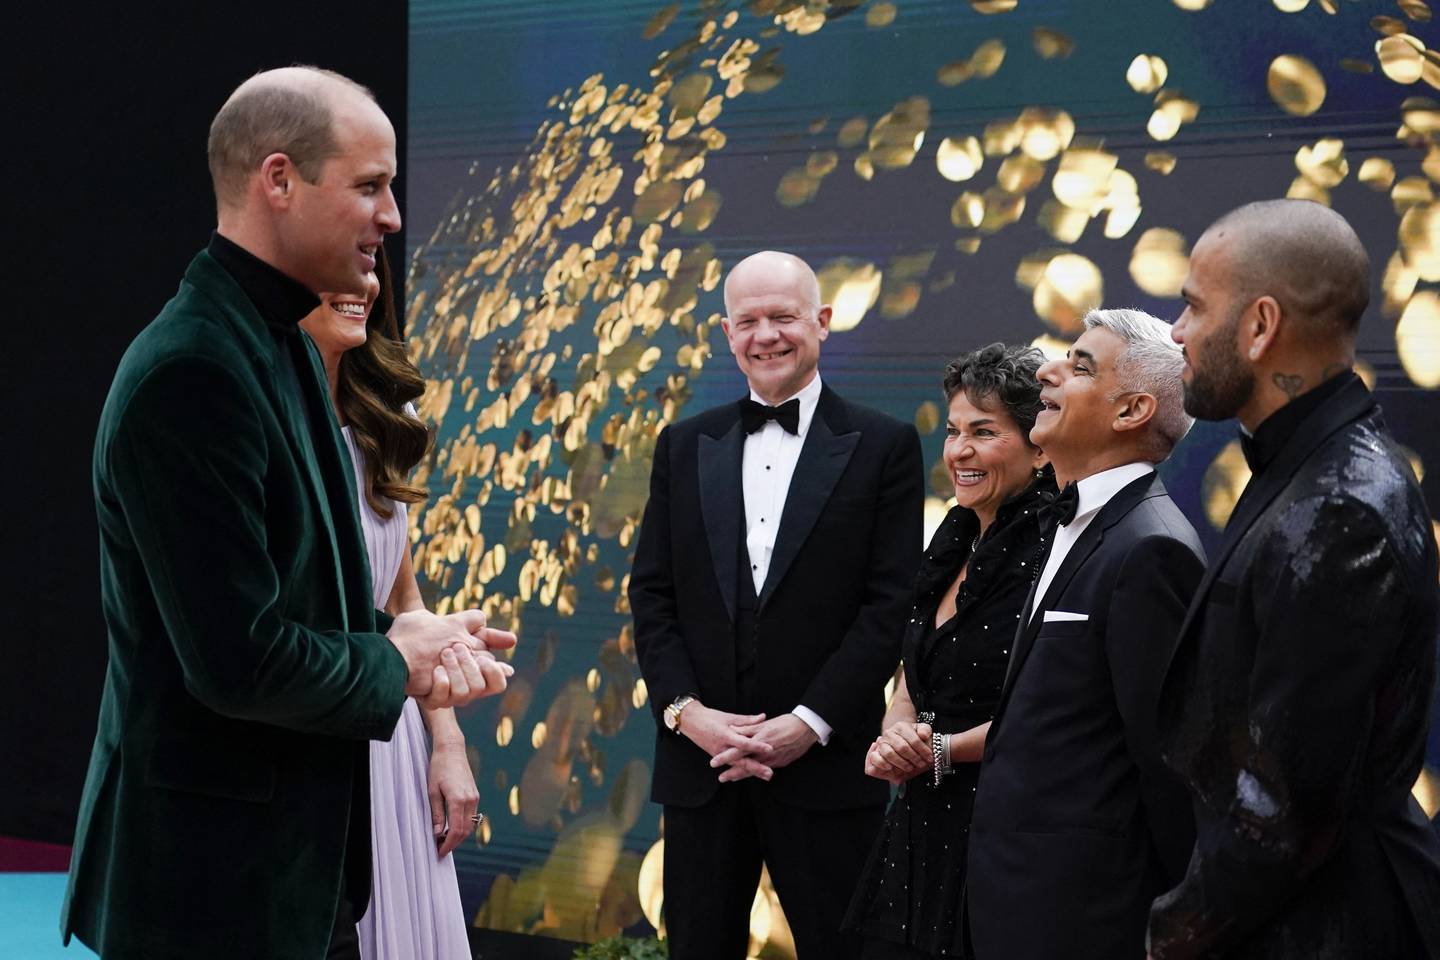 Britain's Prince William, Duke of Cambridge and Britain's Catherine, Duchess of Cambridge speak with guests as they attend the inaugural Earthshot Prize awards ceremony at Alexandra Palace in London on October 17, 2021. The Earthshot Prize honours five inaugural winners with an award of £1 million ($1.4 million, 1.2 million euros) each to pursue solutions to the world's greatest environmental problems at a glitering gala ceremony. Prince William, Duke of Cambridge, launched the prestigious Earthshot Prize in October 2020 and hopes that the event will help propel the fight against climate change leading up to the COP26 summit in Scotland, calling those on the shortlist "innovators, leaders and visionaries".
Alberto Pezzali / POOL / AFP